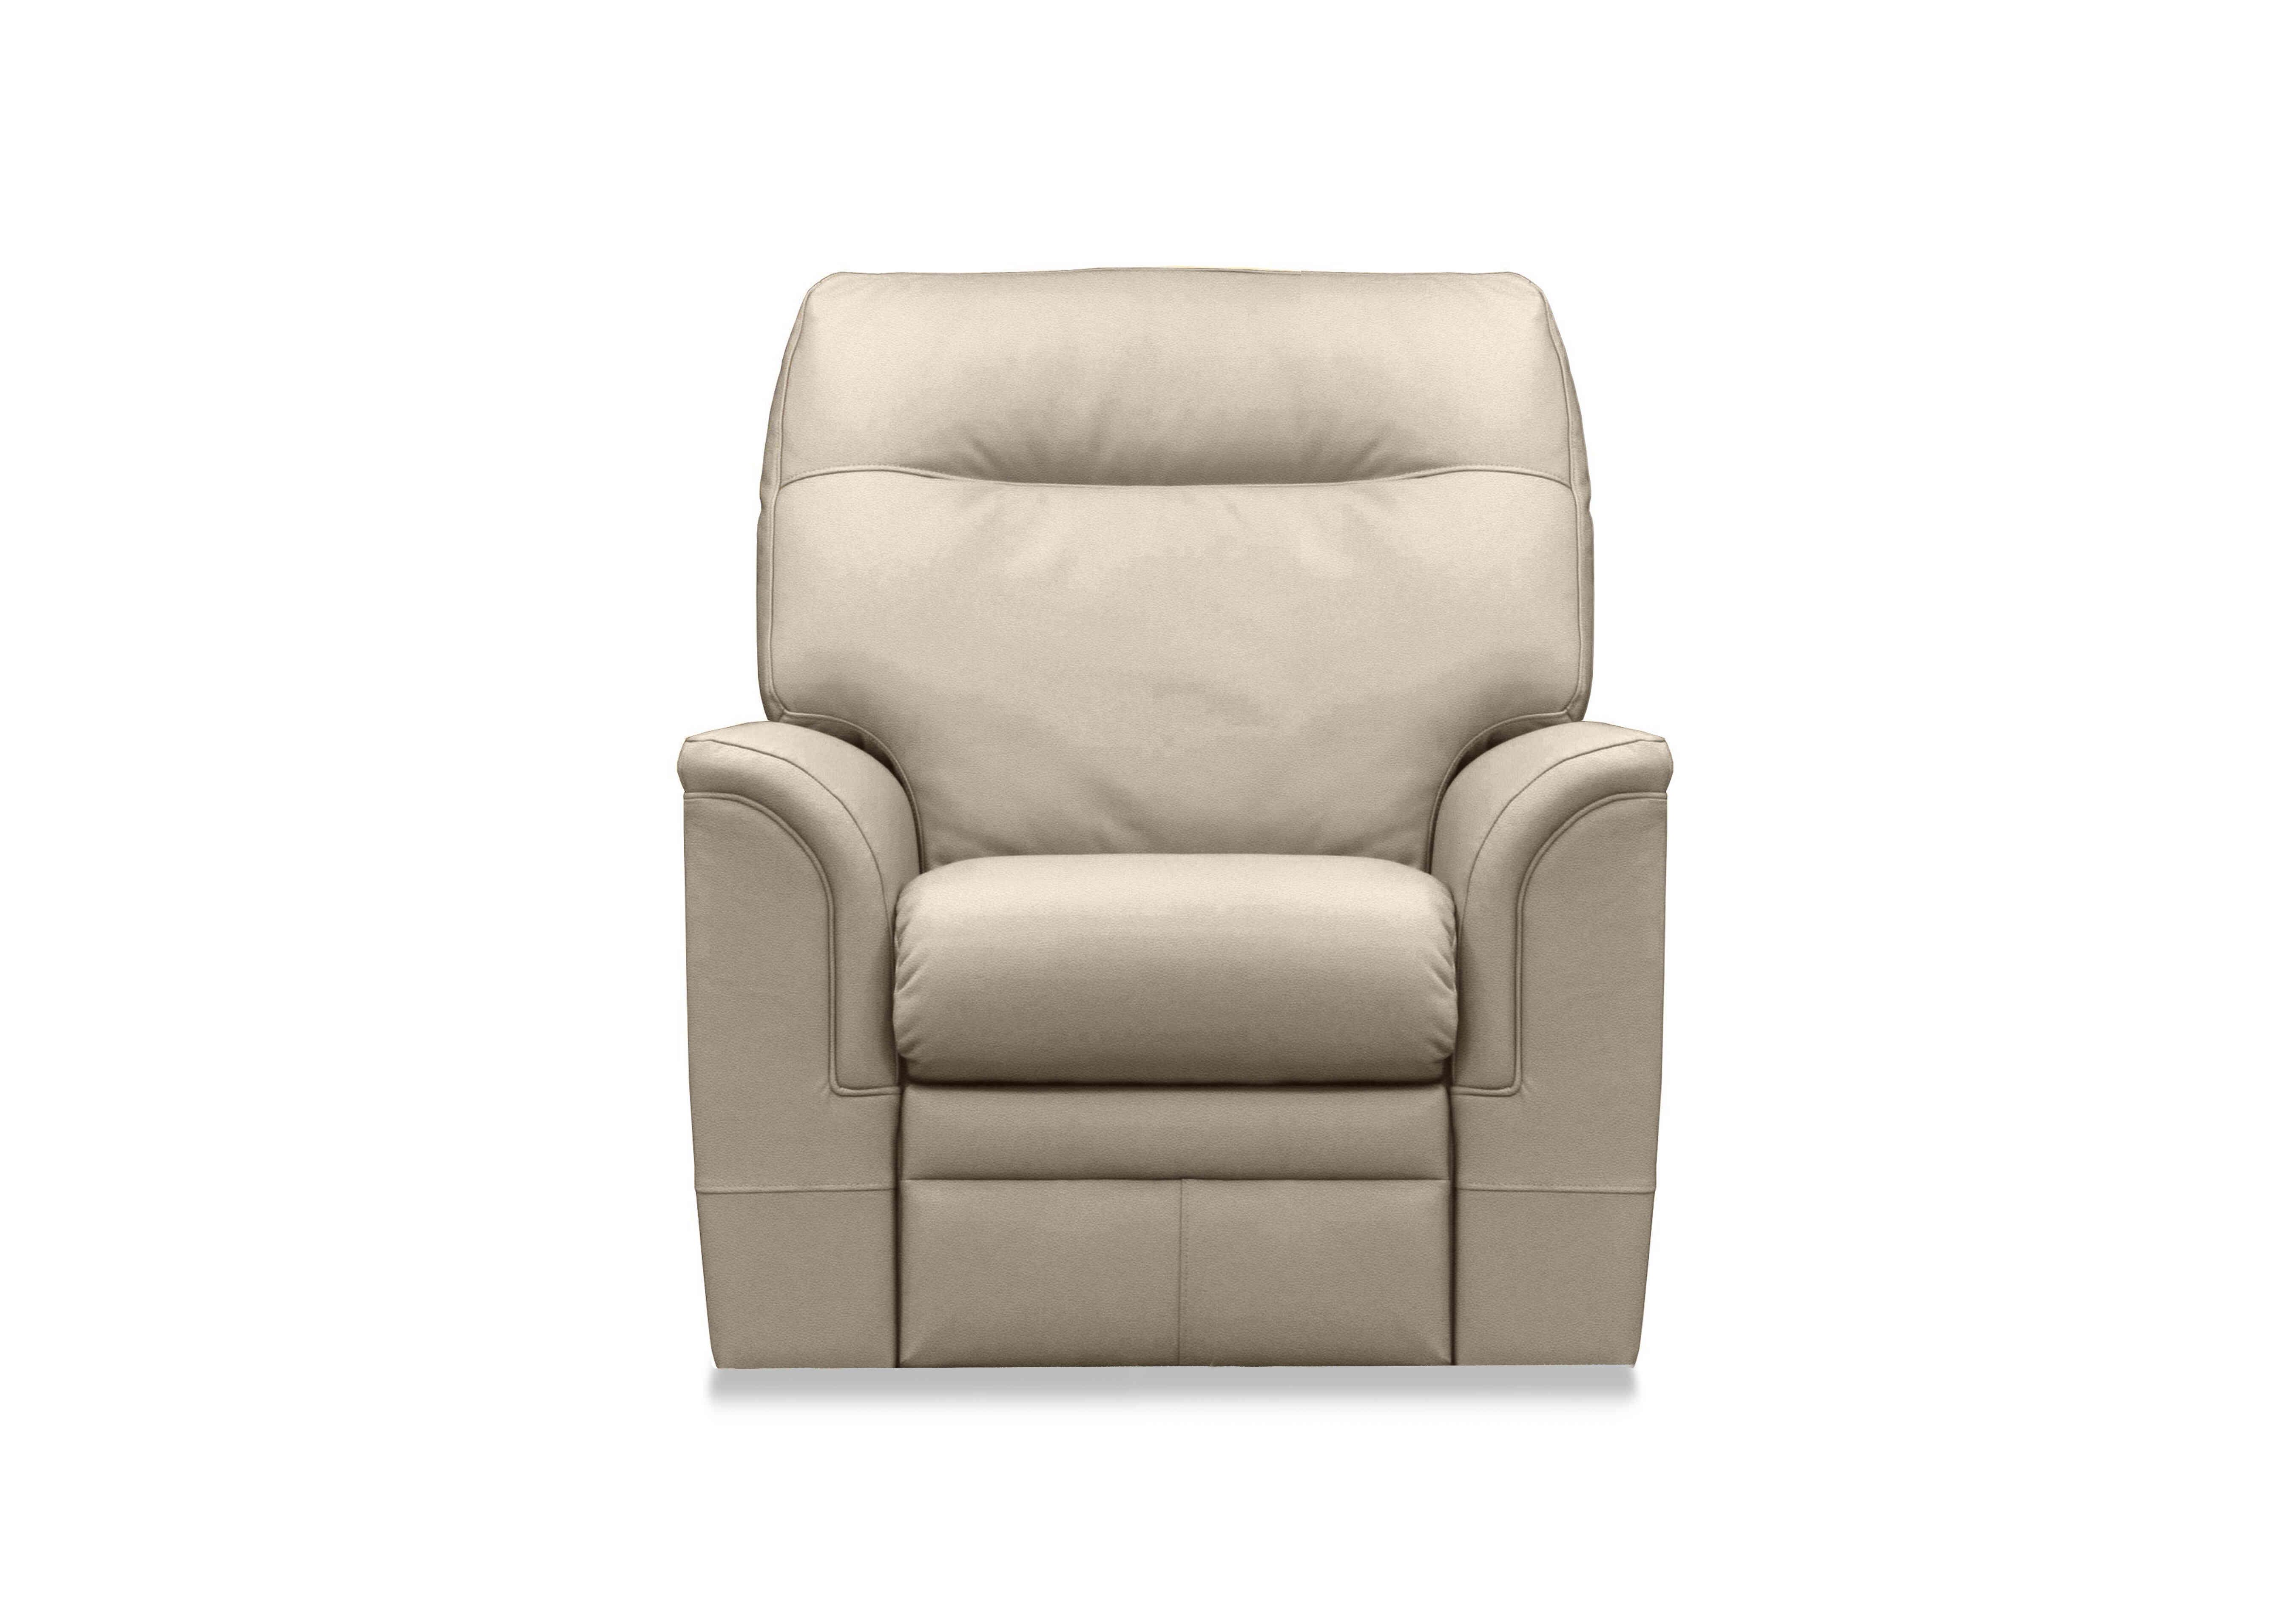 Hudson 23 Leather Chair in Como Taupe 0053051-0019 on Furniture Village